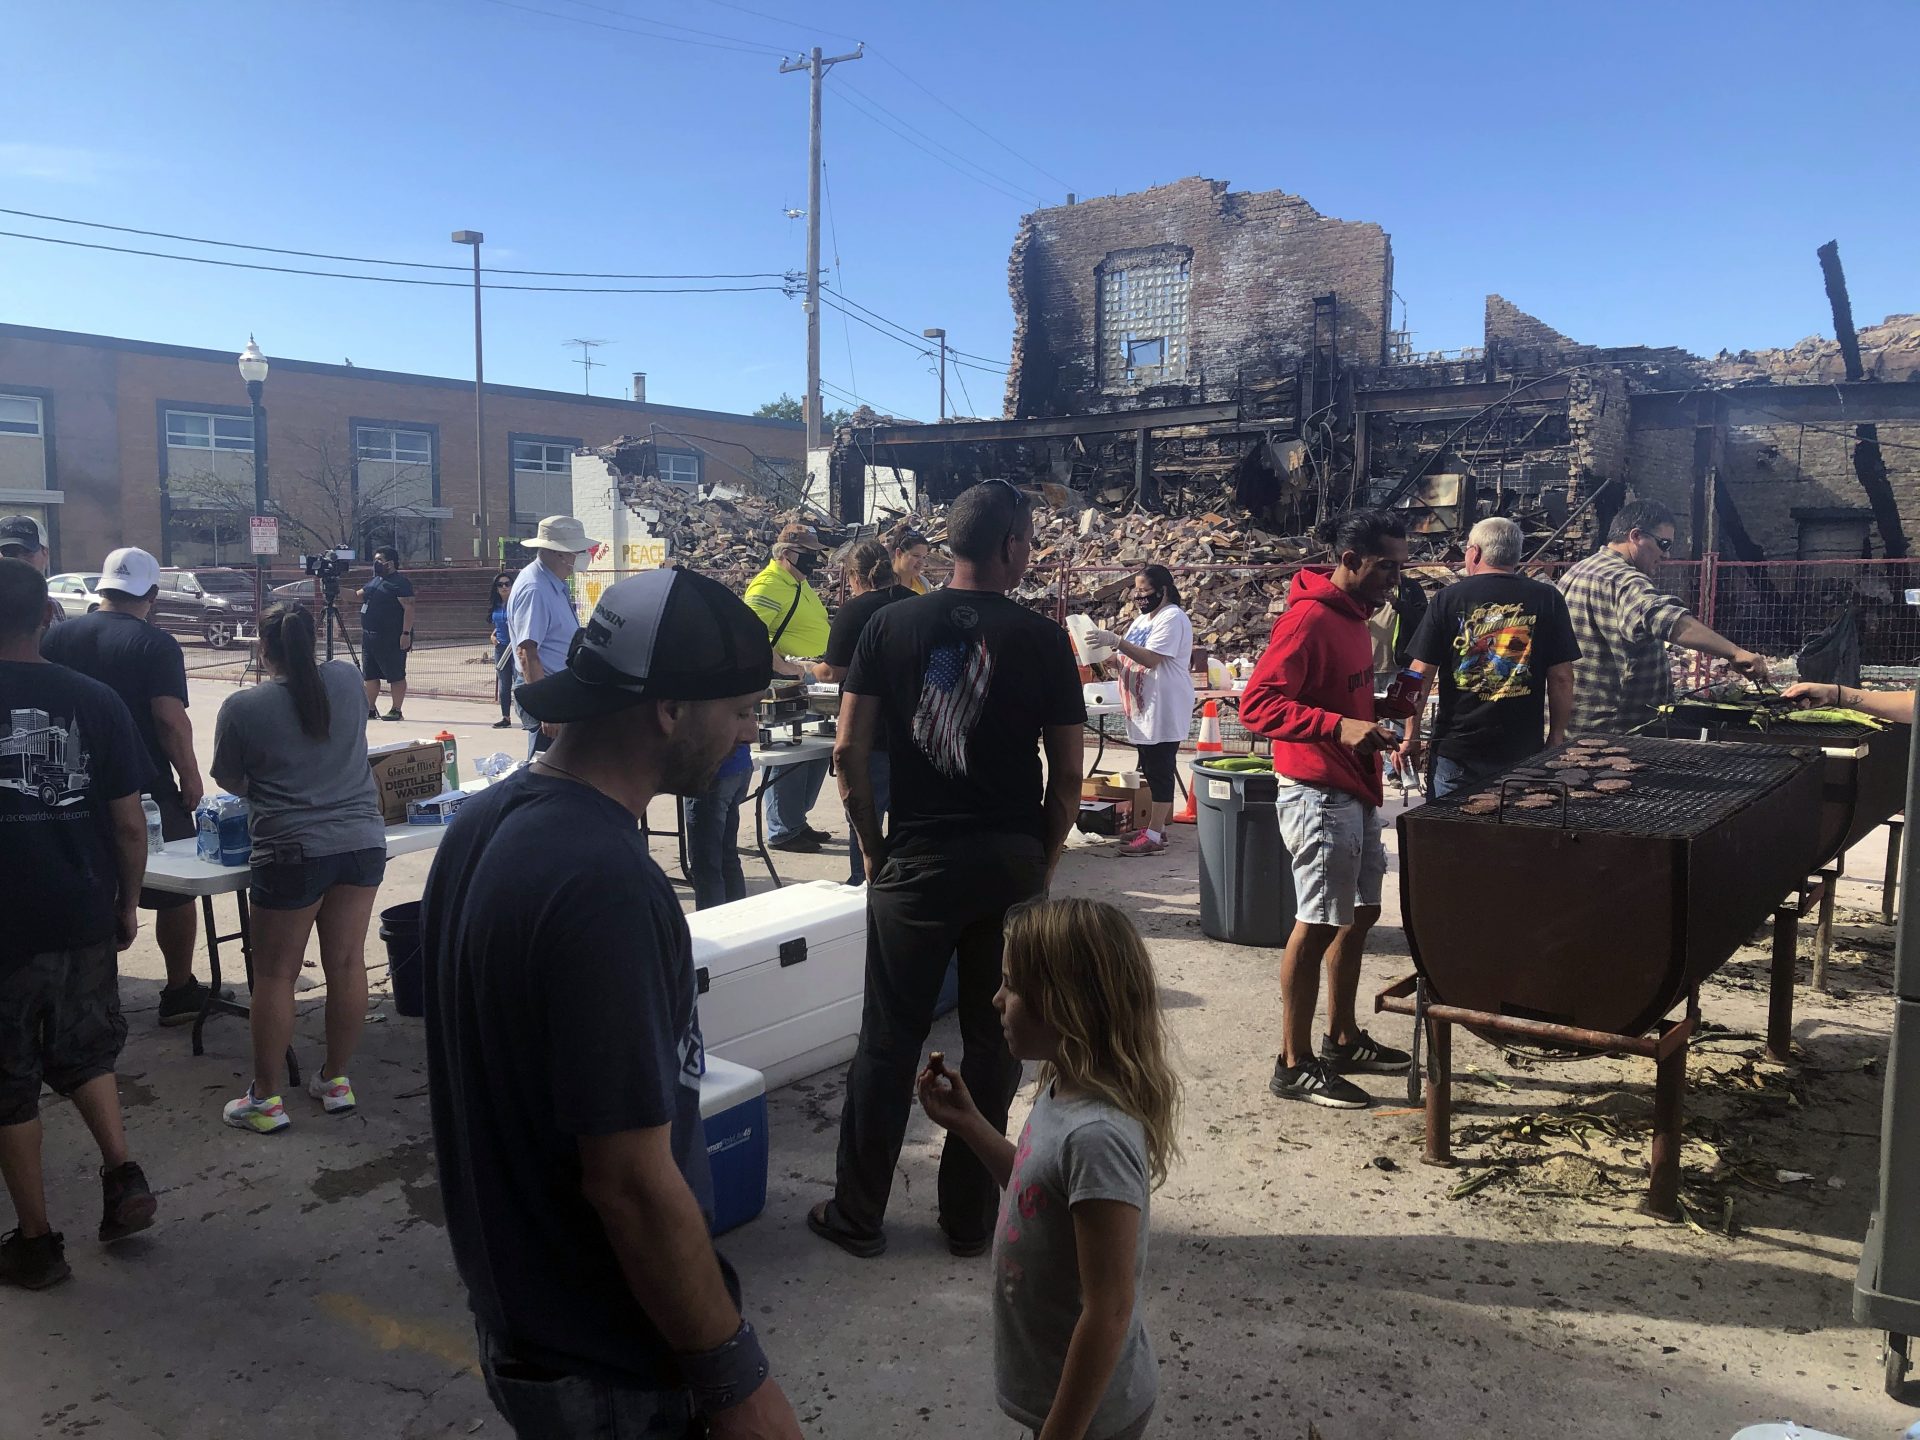 Volunteers prepare hamburgers for mural painting volunteers working in front of one of the city's dozens of burnt buildings in Kenosha, Wis., Sunday, Aug. 30, 2020. The southern Wisconsin city remained on edge following the police shooting of Jacob Blake, a Black man, and the violent protests that followed.